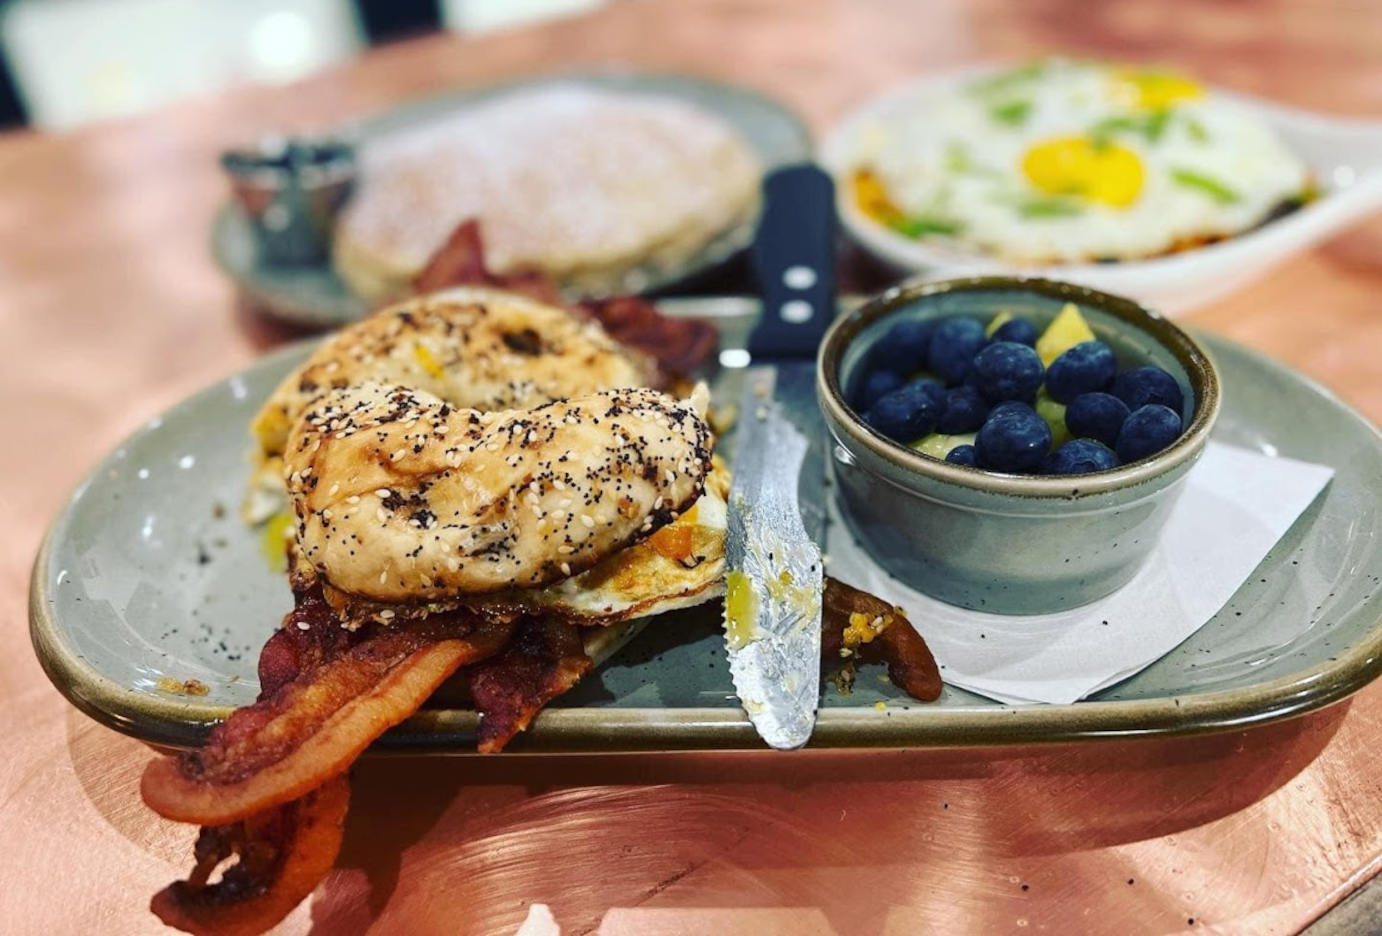 Egg, cheese and bacon bagel sandwich served with berry and fruit bowl